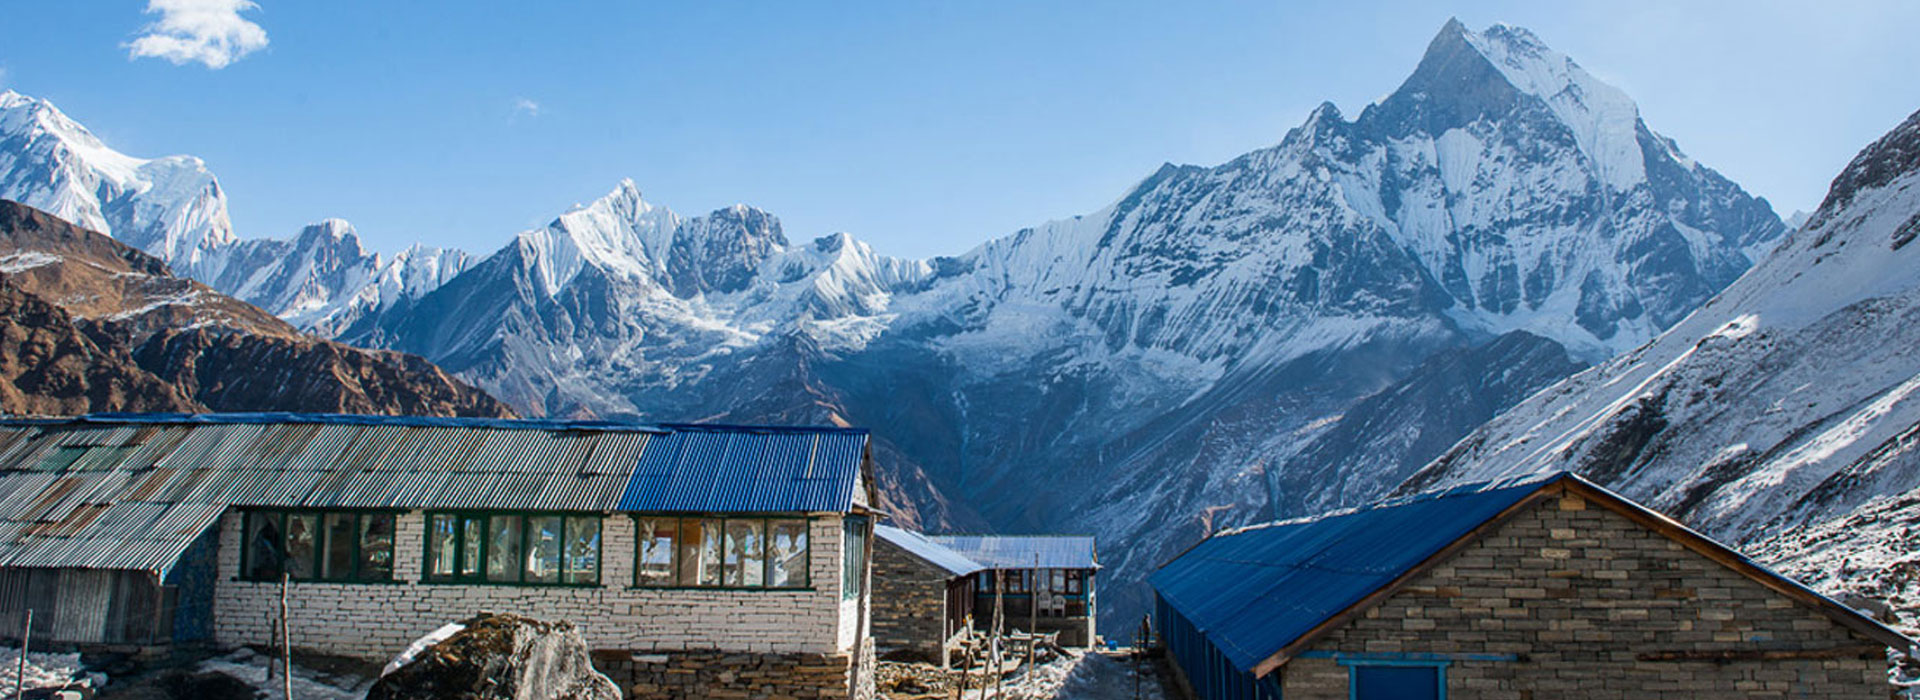 Everything you need to Know about the Annapurna Circuit Trek